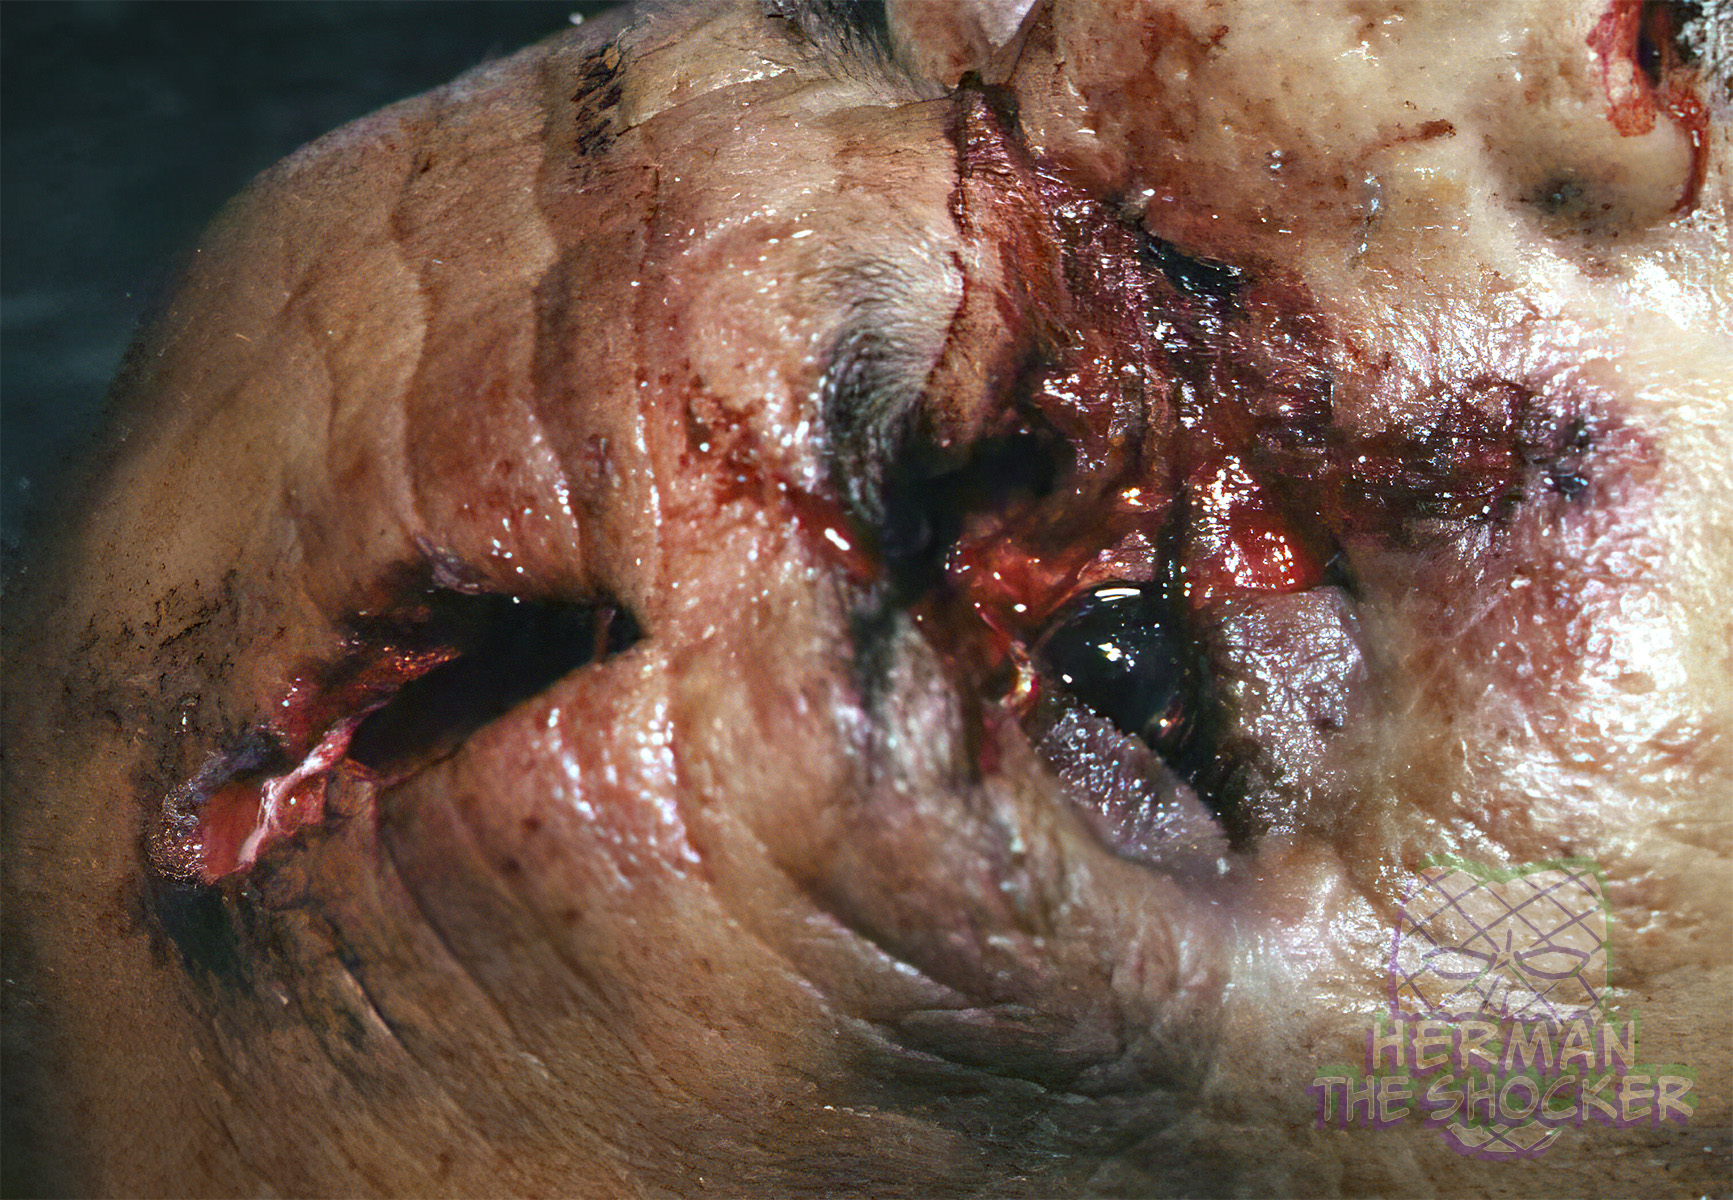 Typical stellate shaped entry wound showing tattooing effect